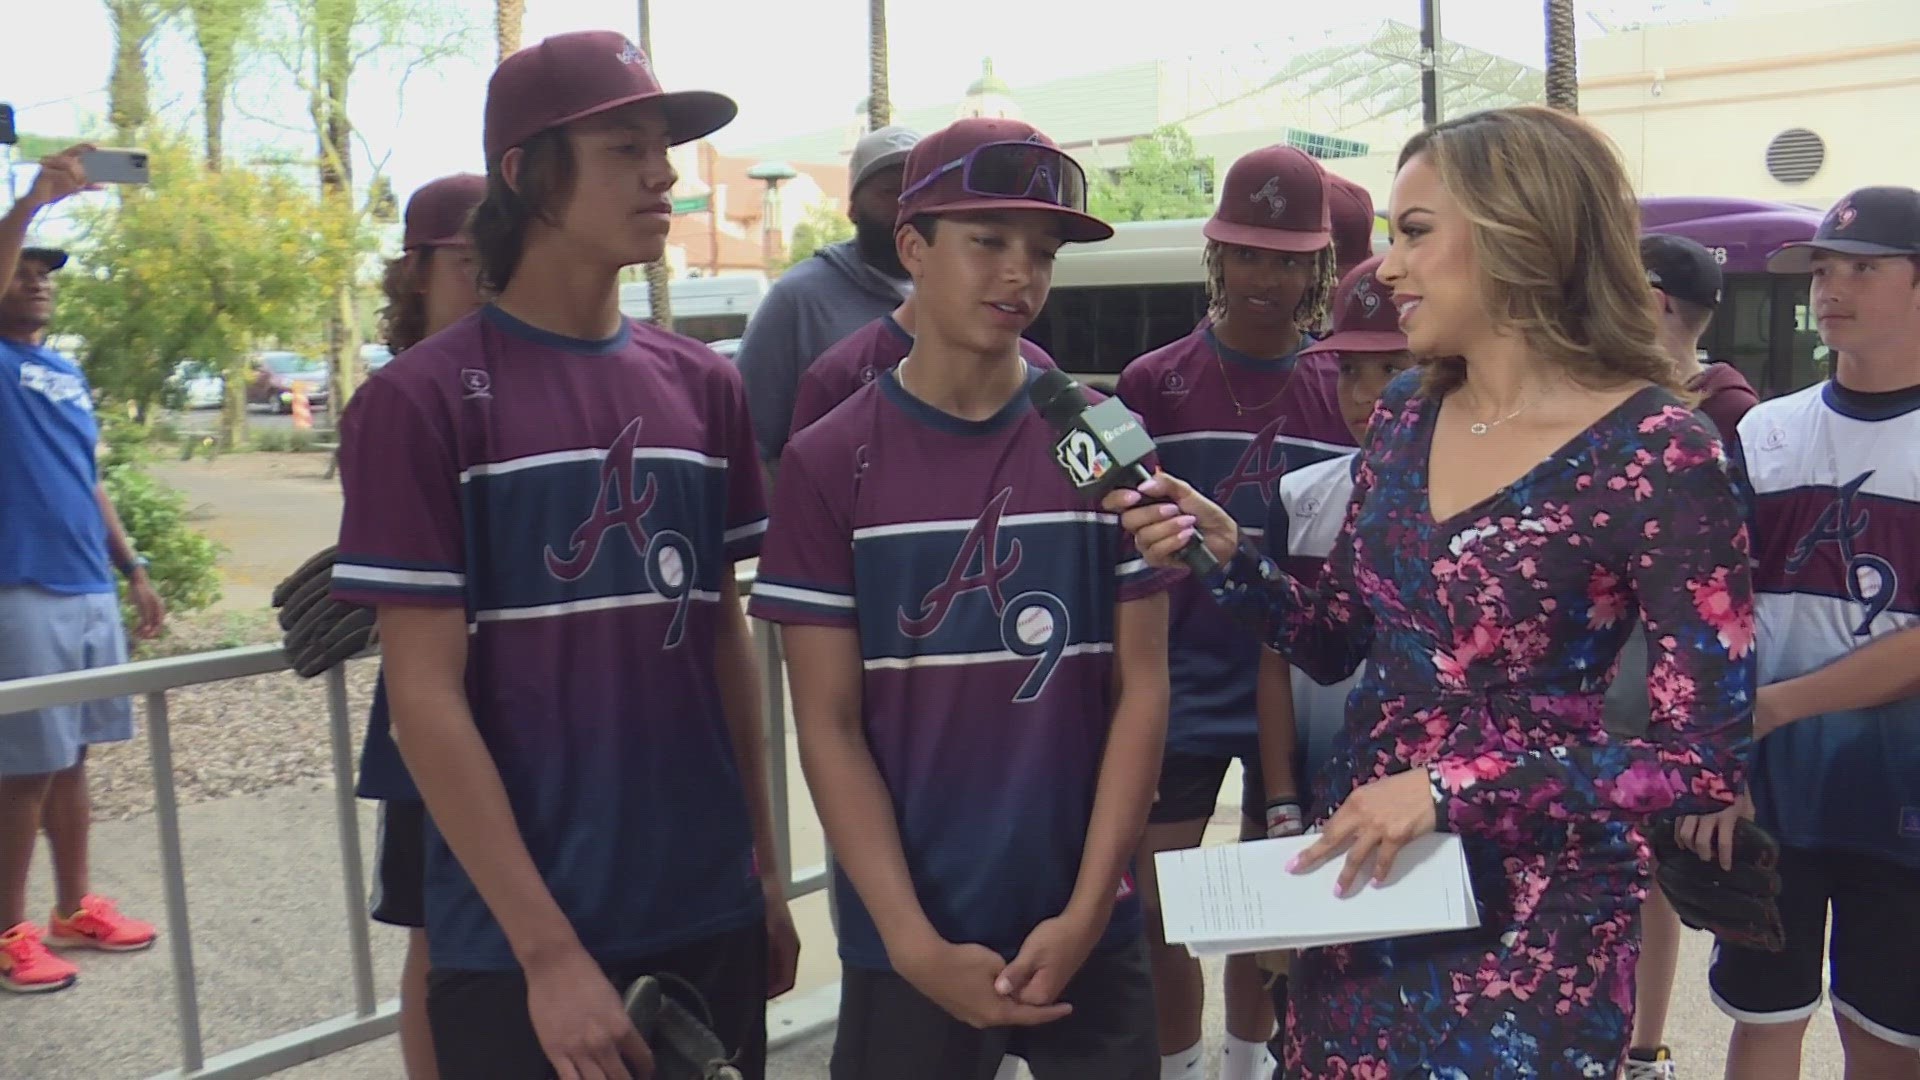 A team of young athletes got an unexpected surprise on Thursday evening while stopping by to say hello to 12News.